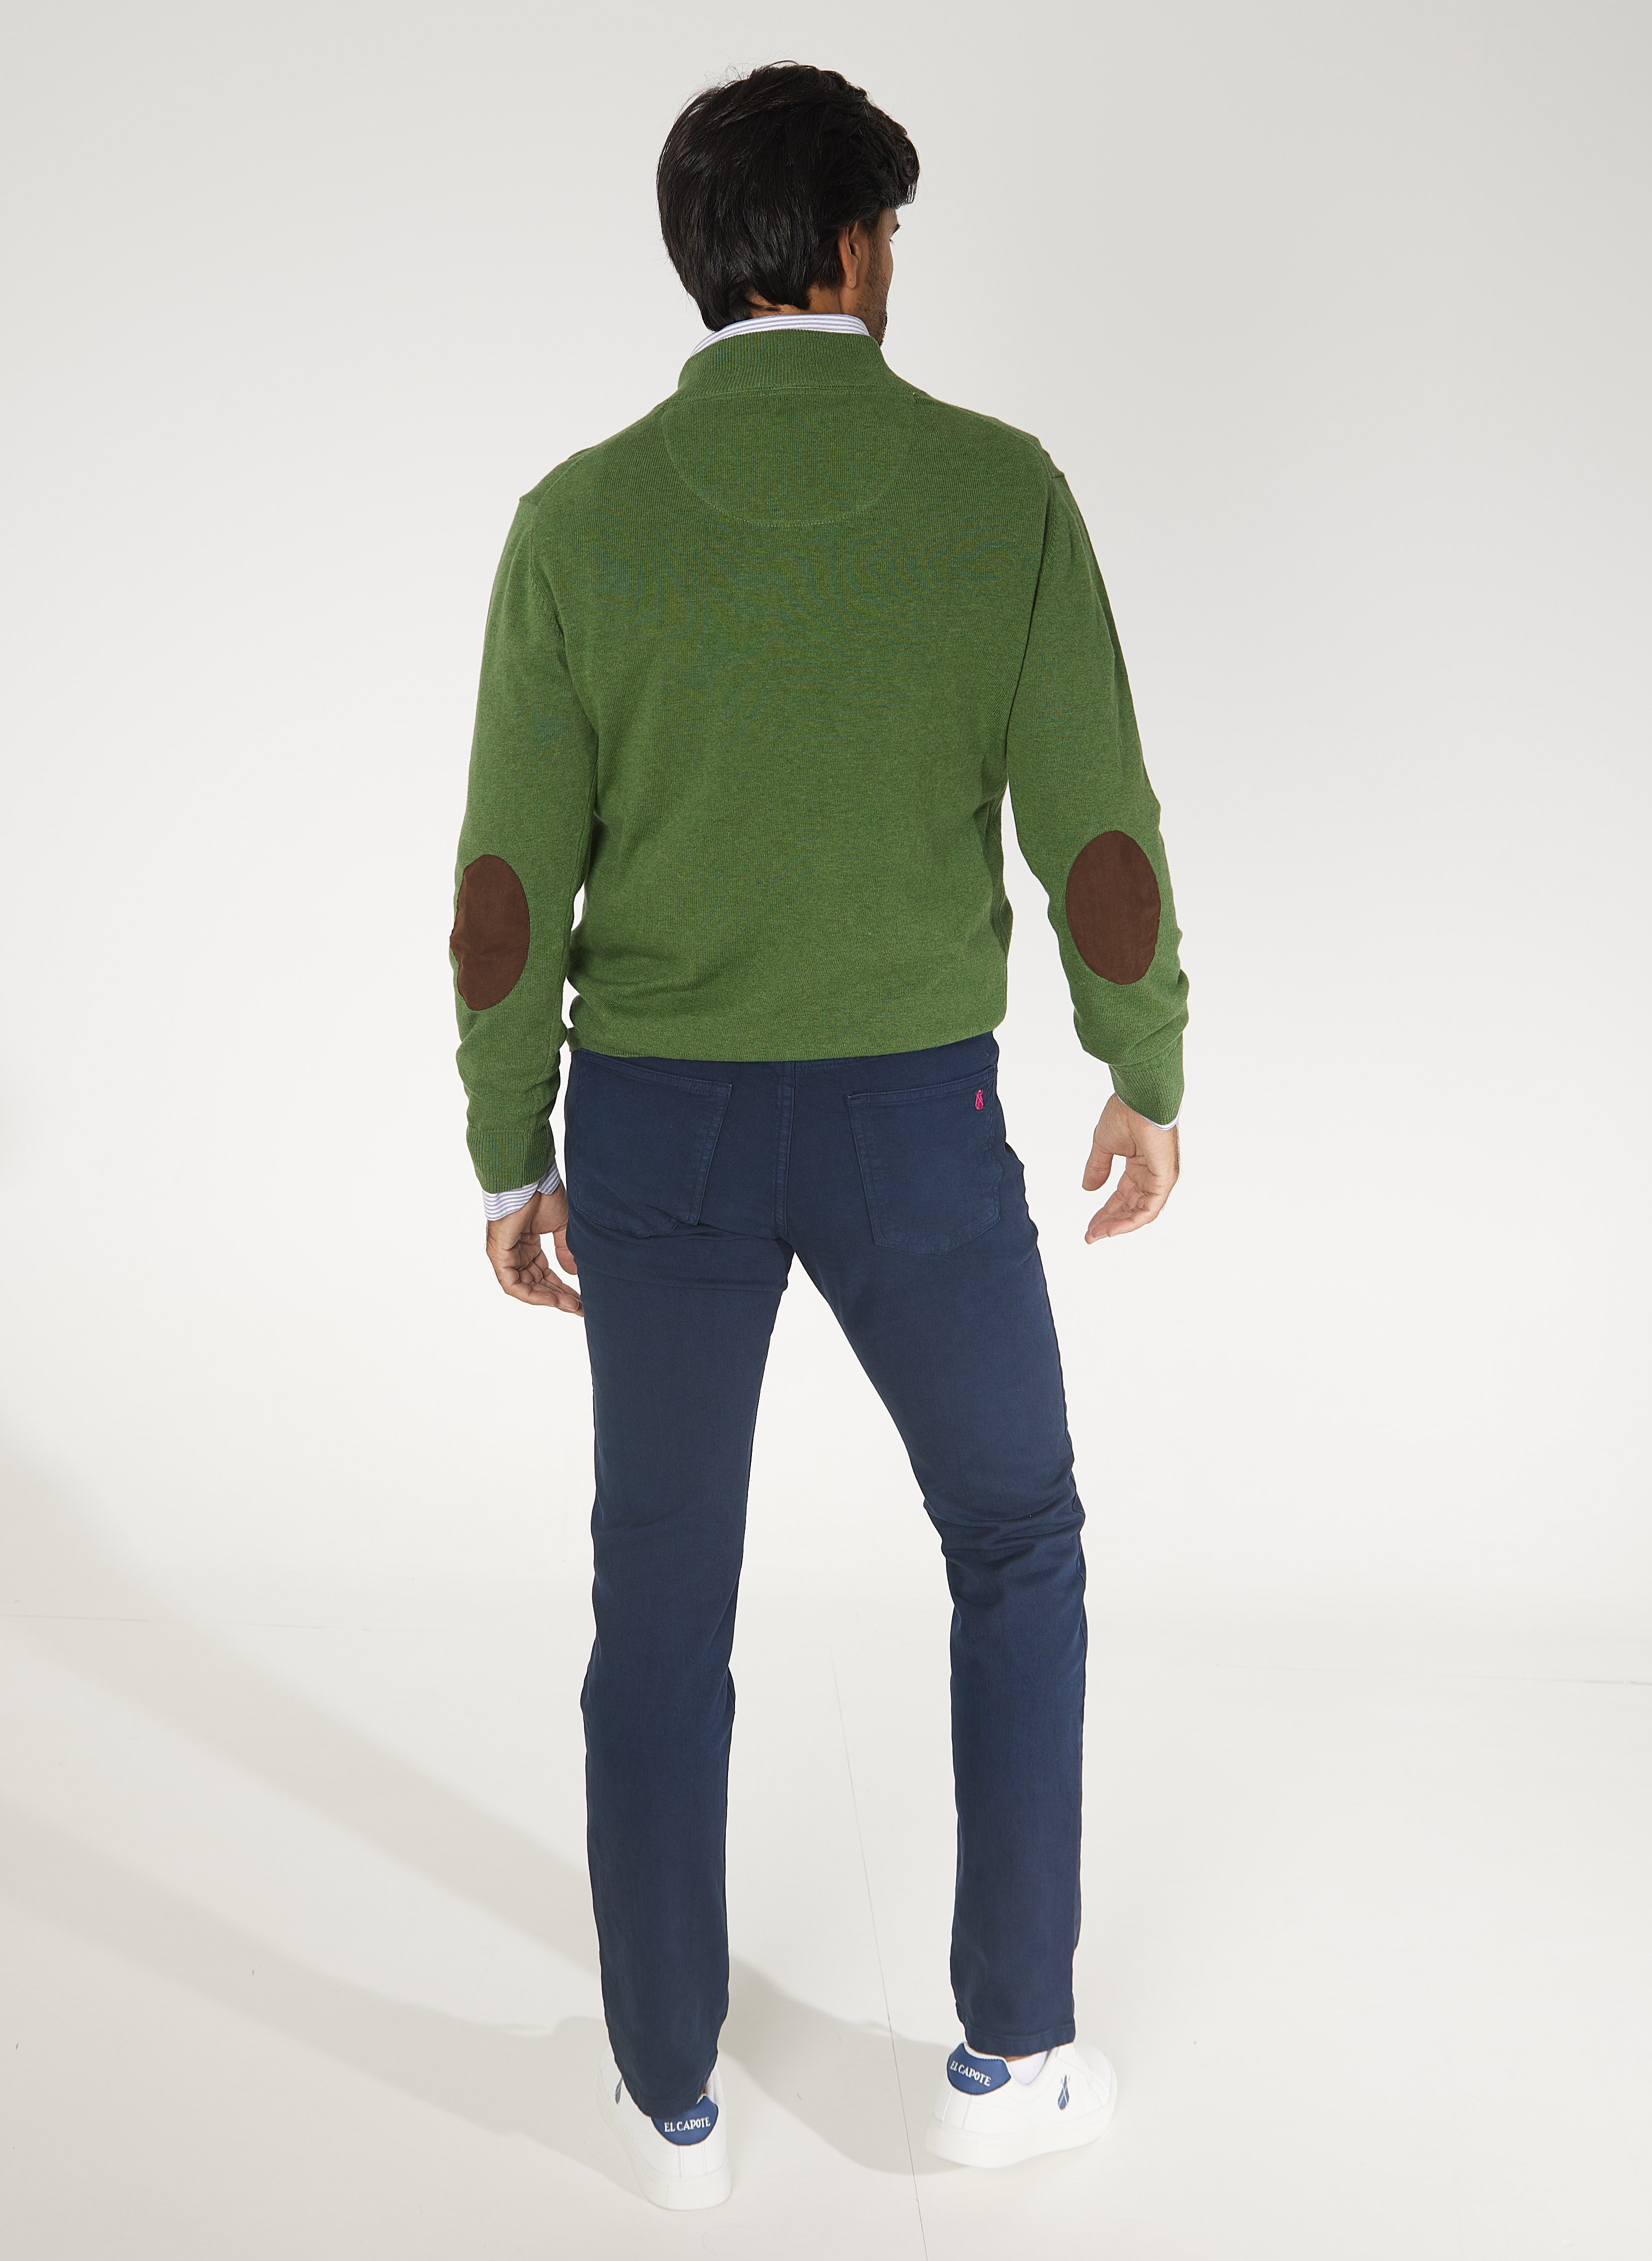 Green Sweater 4 Buttons and Elbow Patches Man